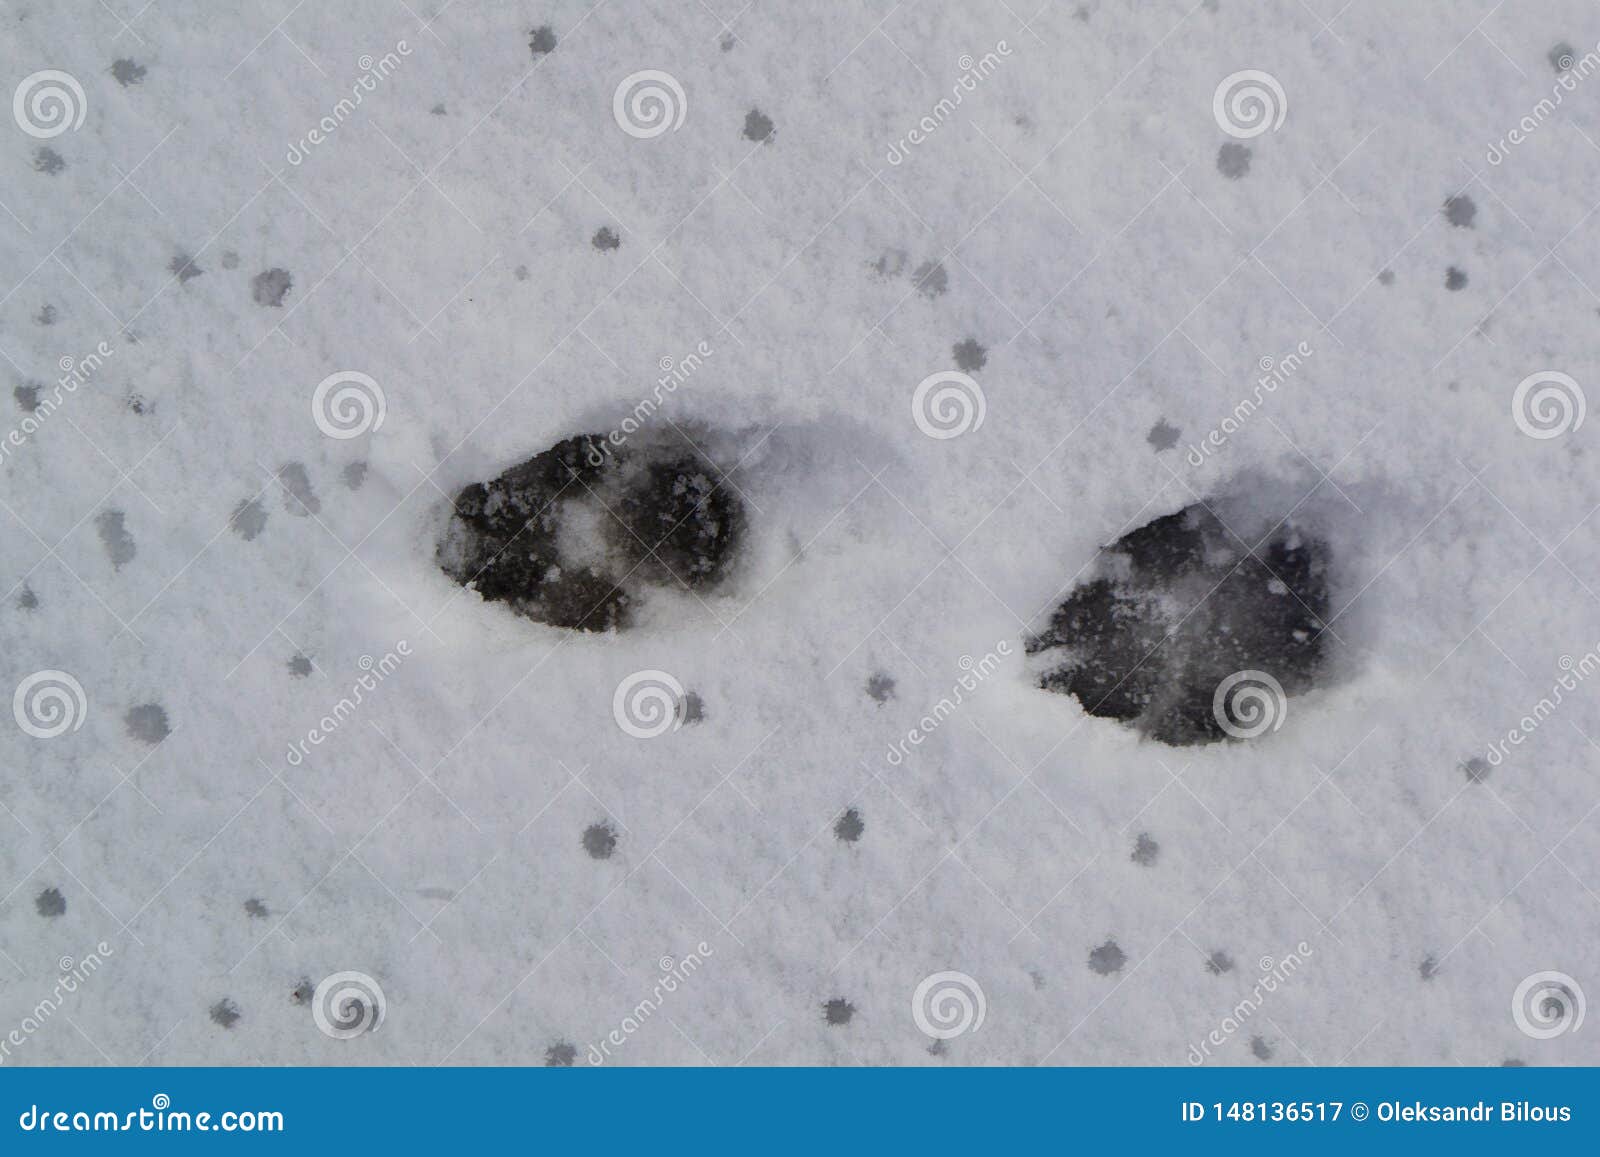 The Texture of the Snow Surface with Dog Tracks Stock Image - Image of ...